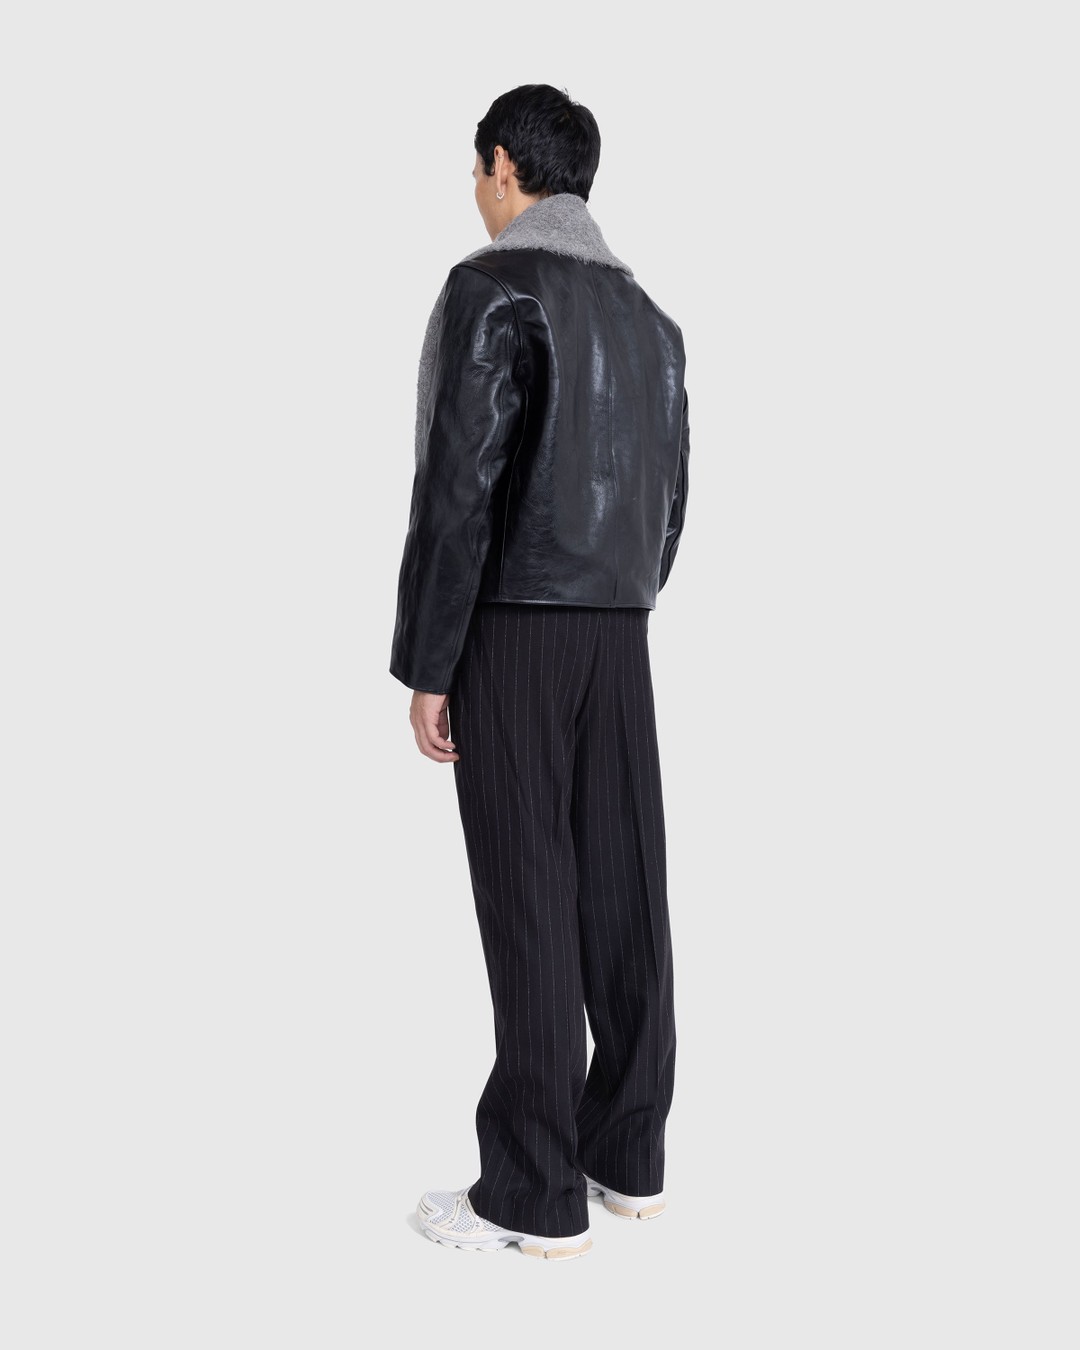 Our Legacy – Mini Jacket Top Dyed Black Leather | Highsnobiety Shop